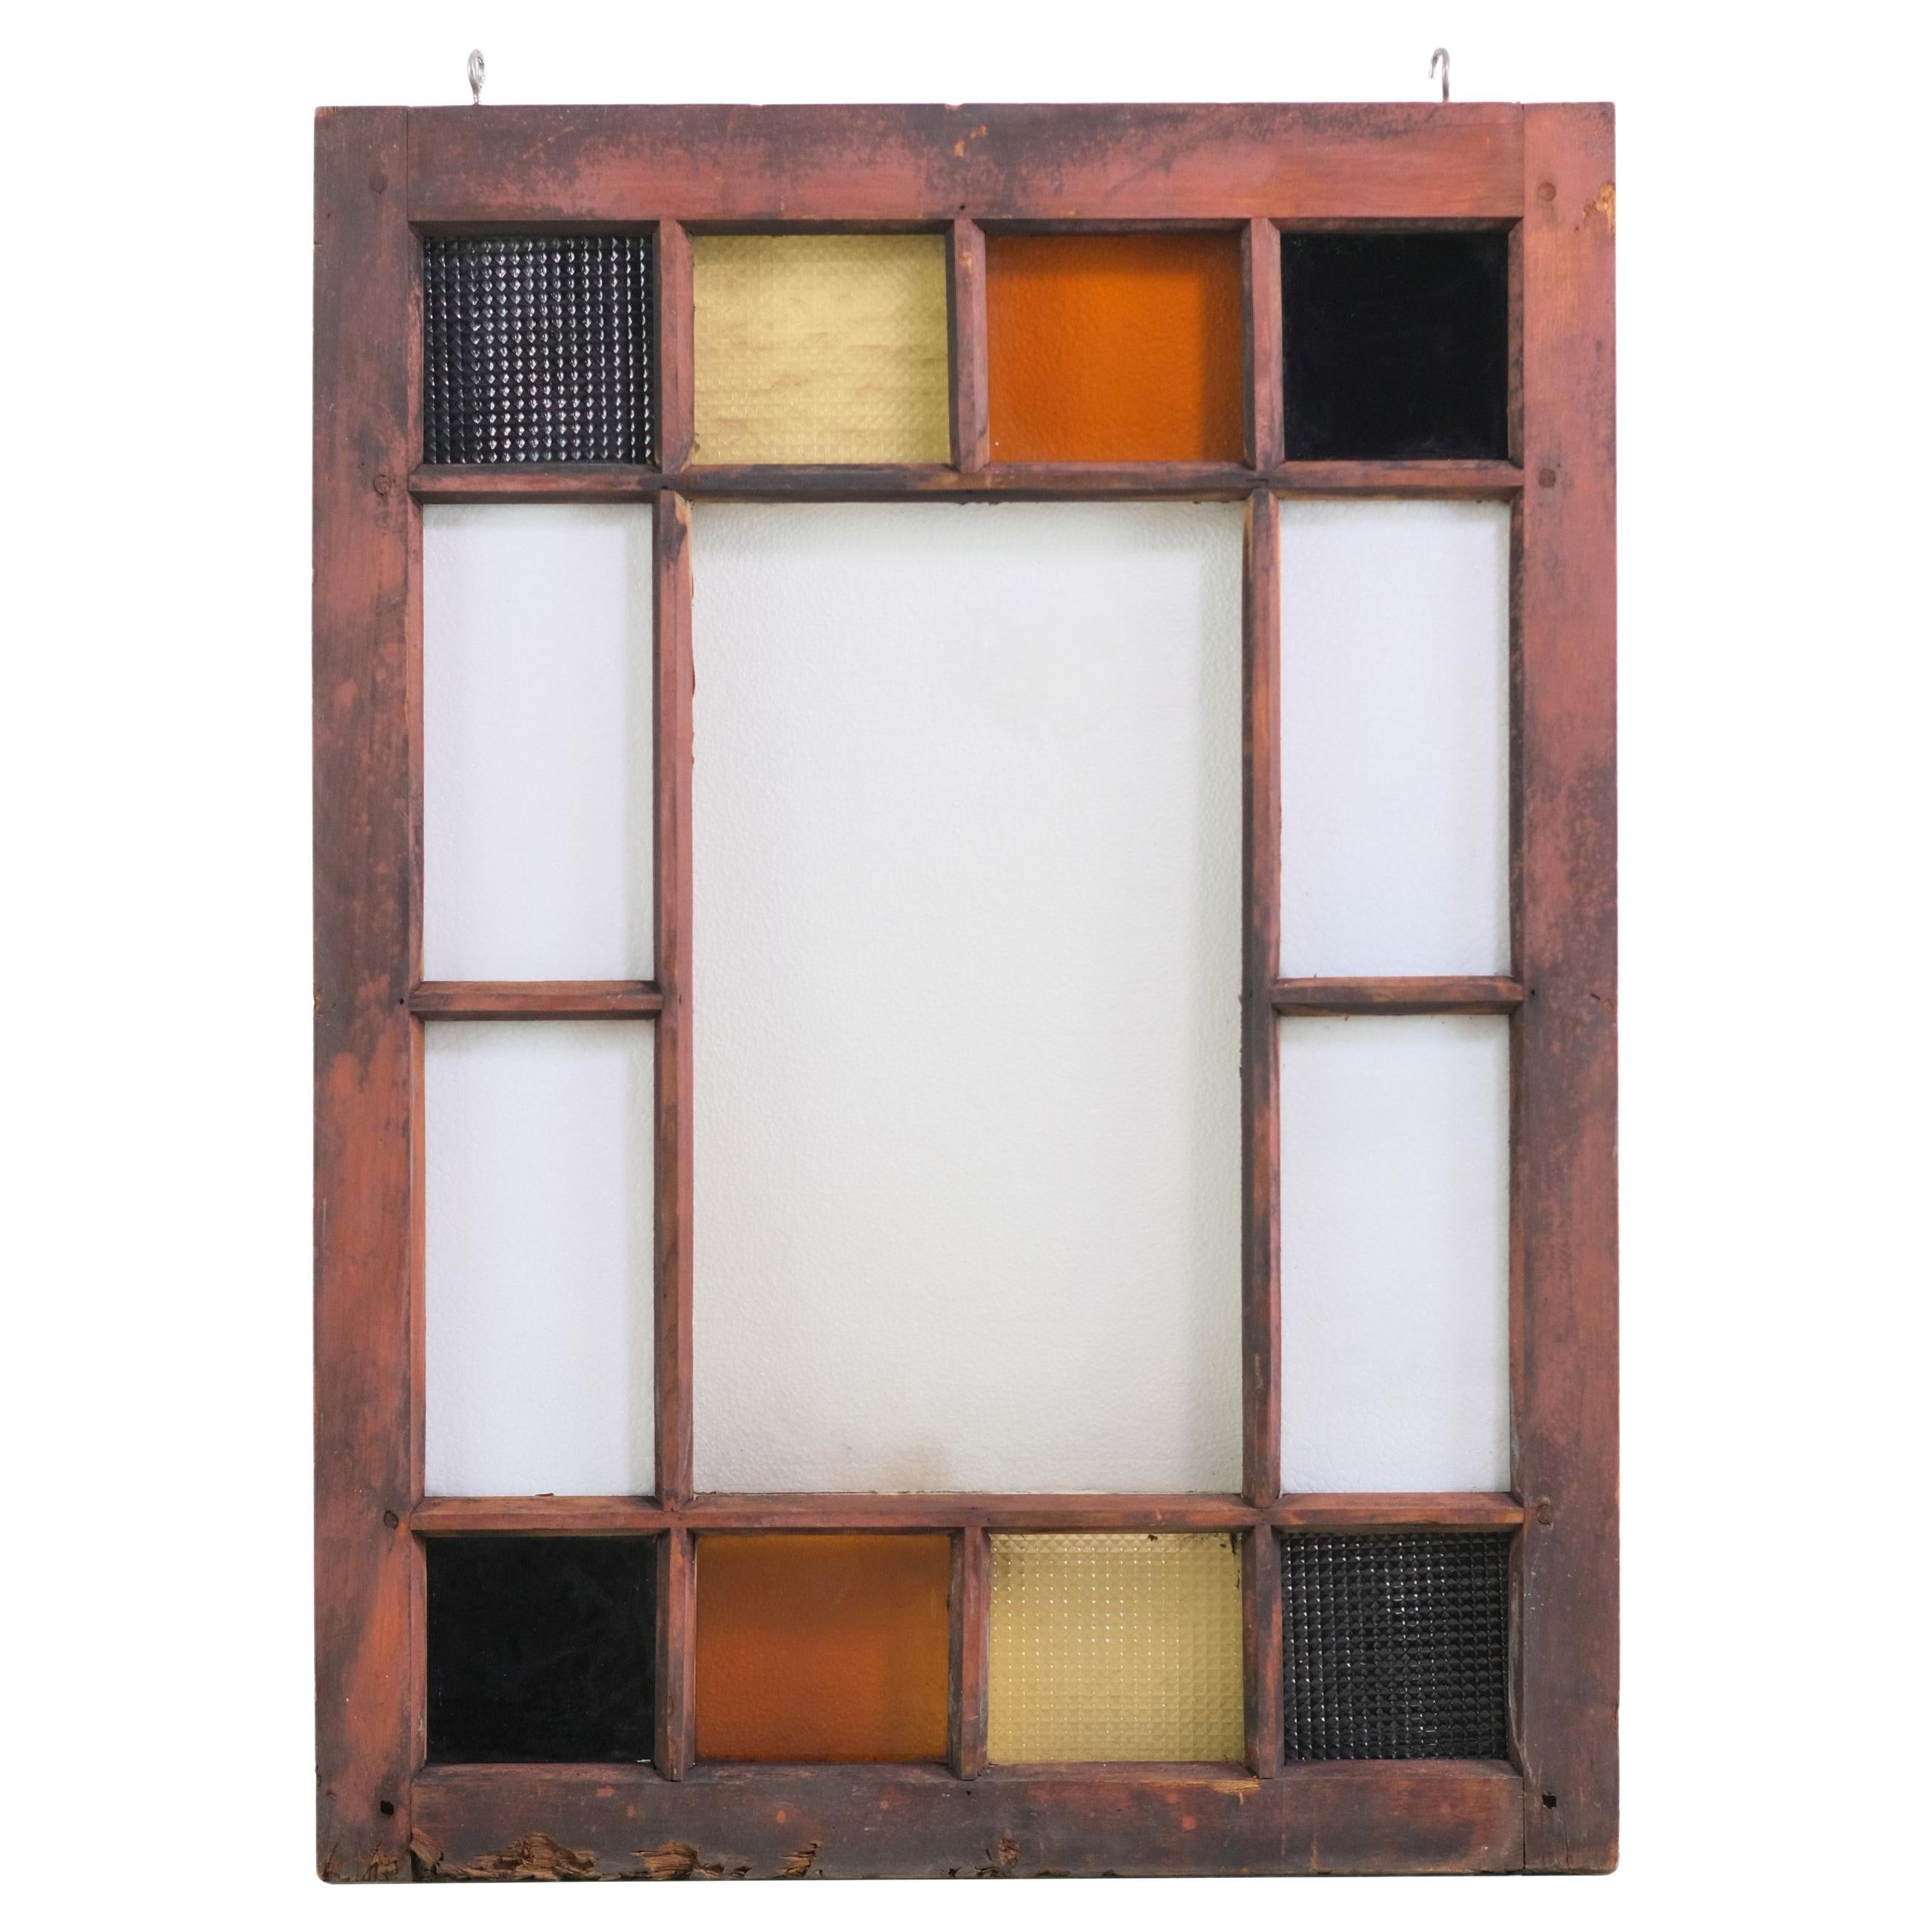 Stained Glass Window -Yellow/Orange/Black Textured Squares W/ Clear Glass Panes